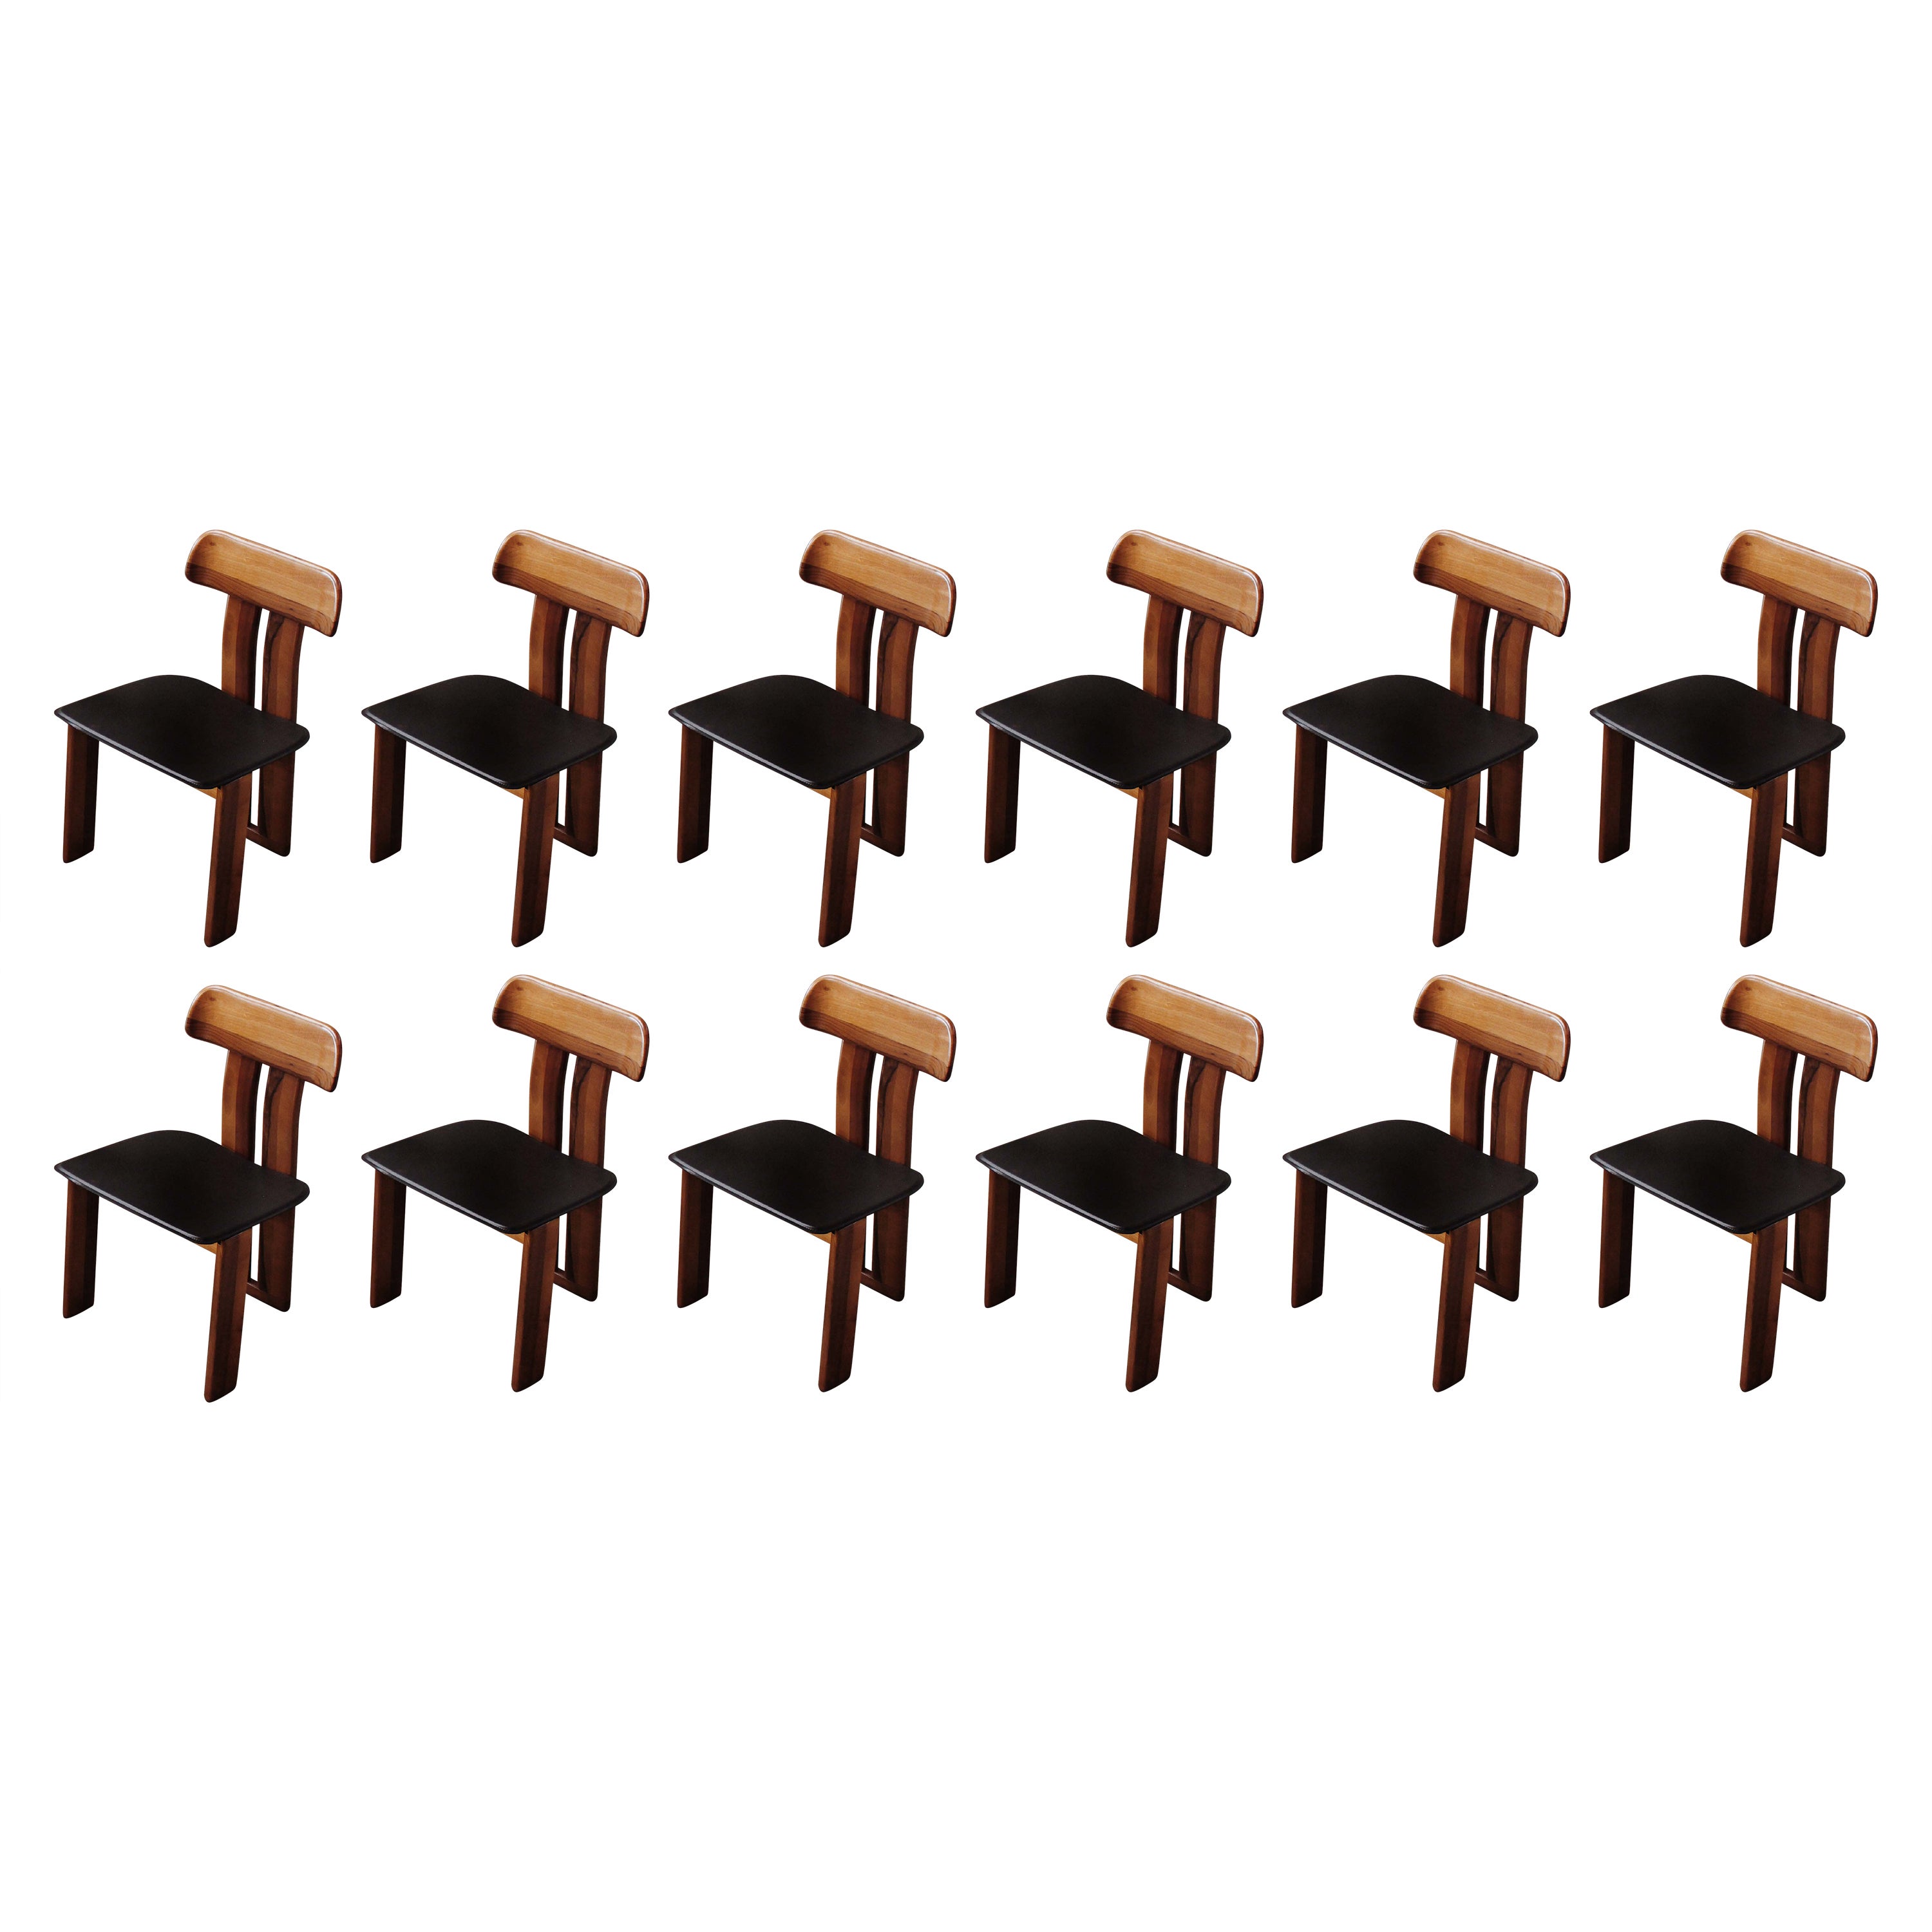 Mario Marenco "Sapporo" Chairs for Mobil Girgi, 1970, Set of 12 For Sale